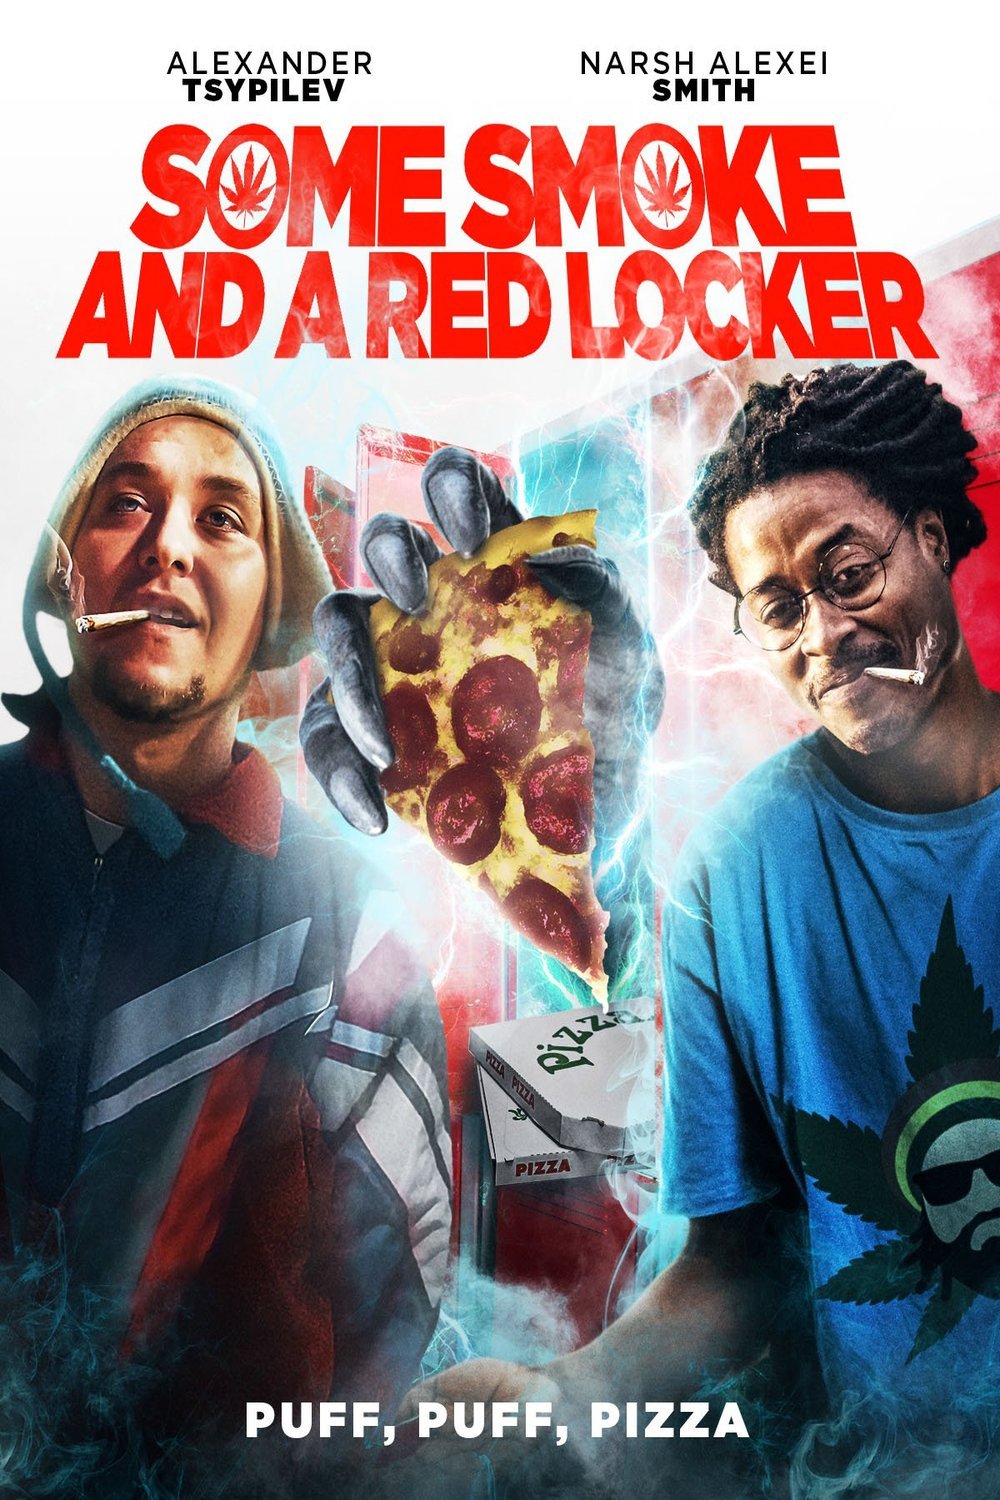 Poster of the movie Some Smoke and a Red Locker